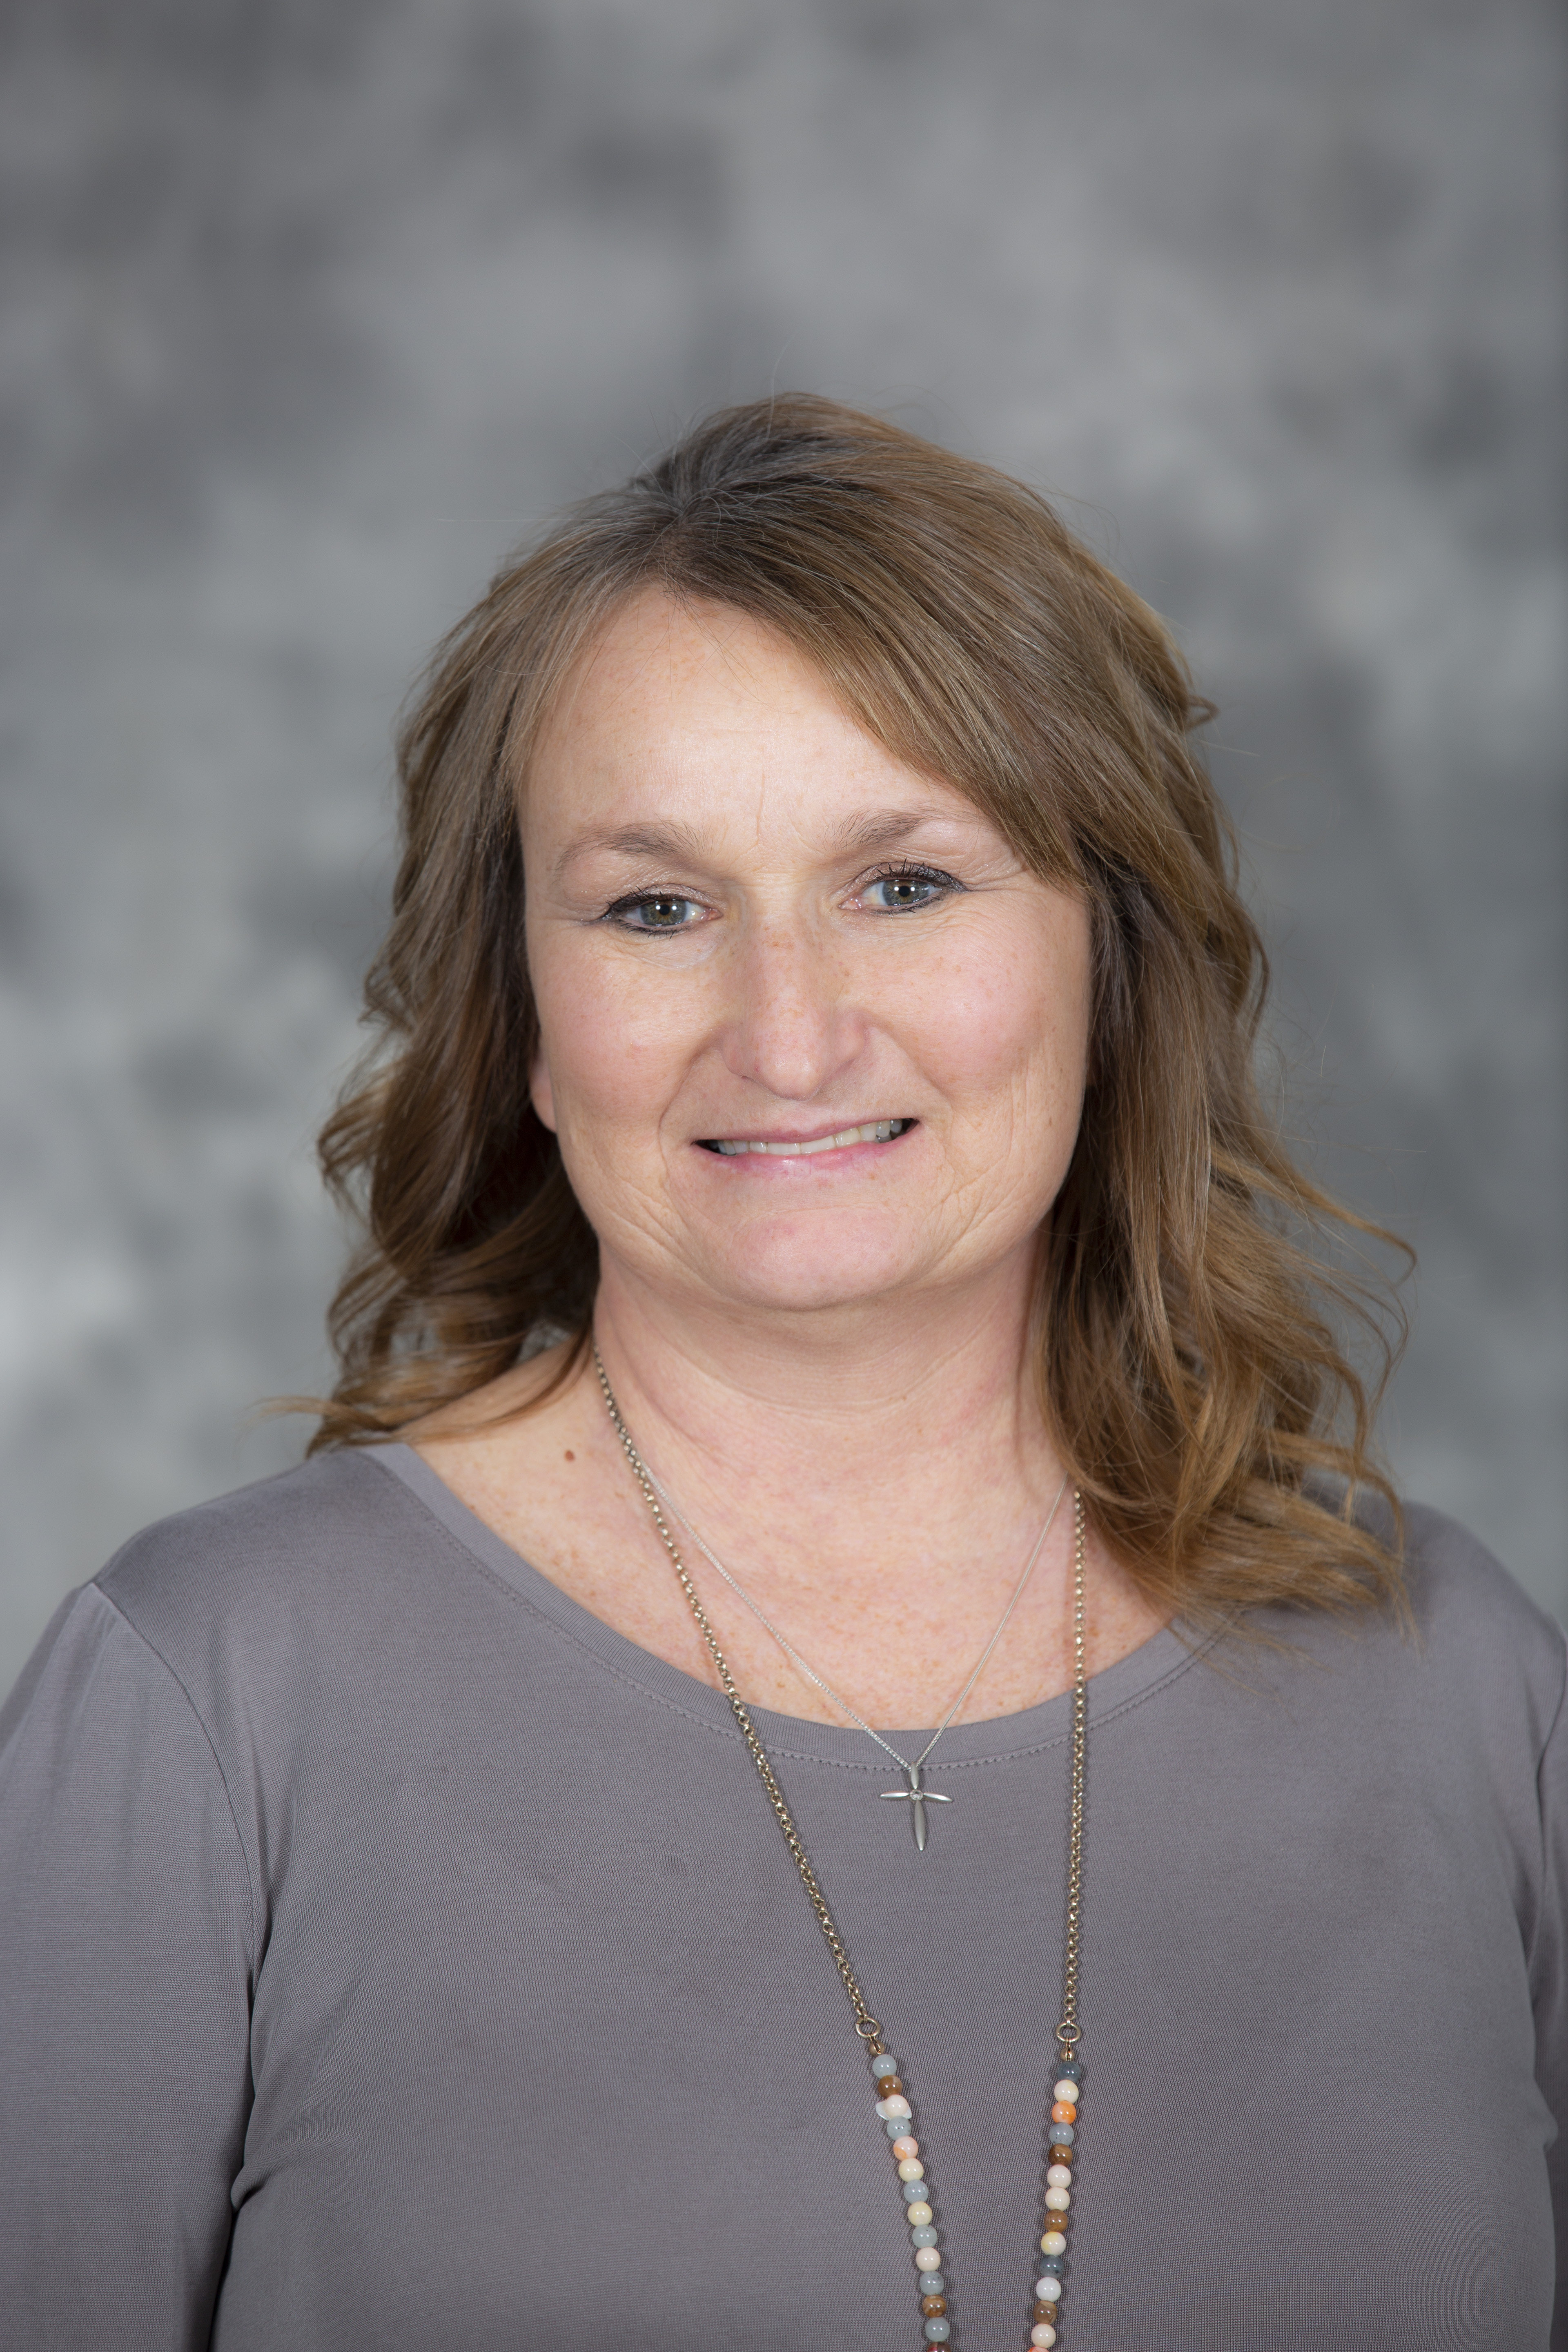 Tammy Jacobs : Iowa State University, Human Sciences Extension and Outreach Hotlines Coordinator